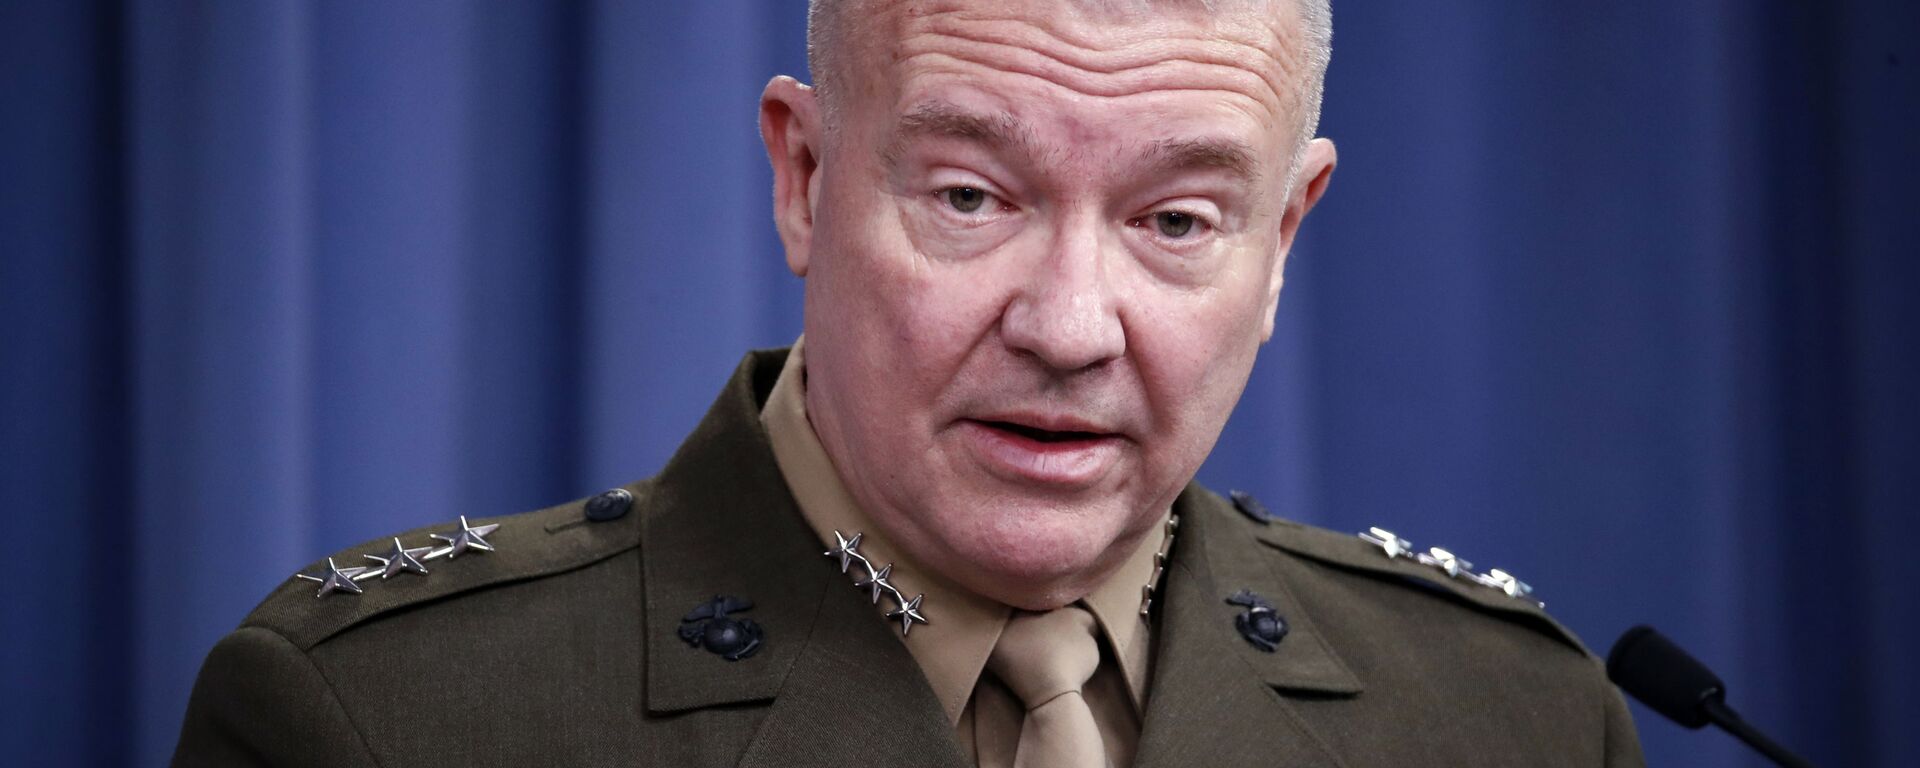 In this April1 14, 2018, file photo, then-Marine Lt. Gen. Kenneth Frank McKenzie speaks during a media availability at the Pentagon in Washington. McKenzie, the Marine general overseeing the U.S. war effort in Afghanistan says the Islamic State affiliate there has hopes of attacking the U.S. homeland. But McKenzie says the extremist group’s aspirations are being frustrated by American counterterrorism operations in its strongholds in northeastern Afghanistan.  - اسپوتنیک افغانستان  , 1920, 10.09.2023